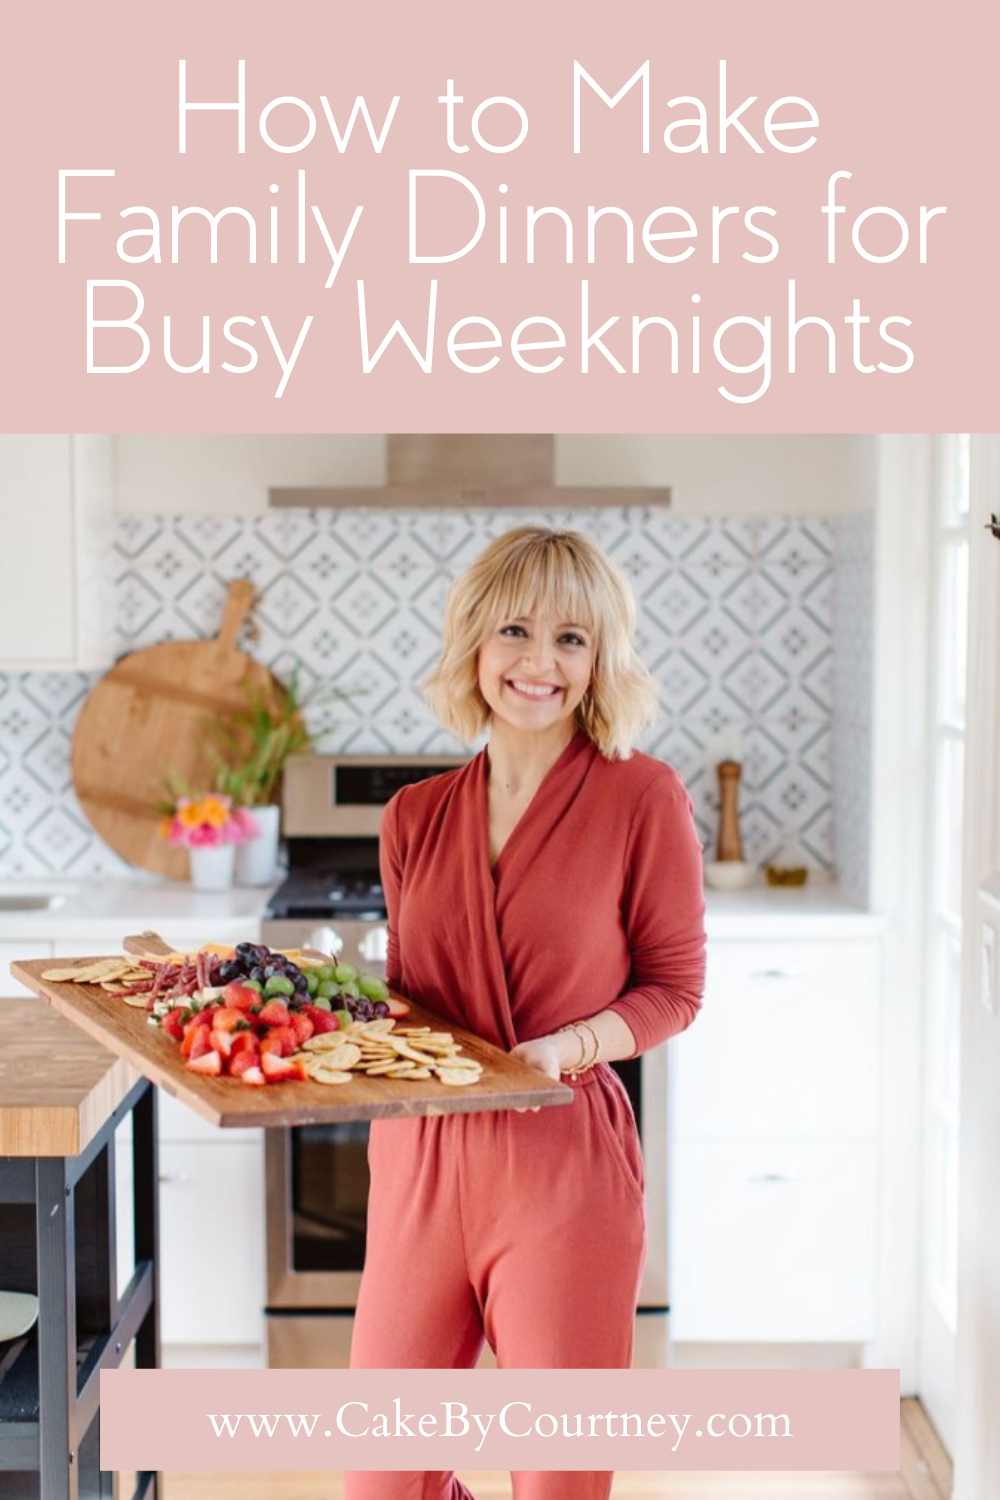 Tips and tricks to weeknight meals your kids will love. www.cakebycourtney.com